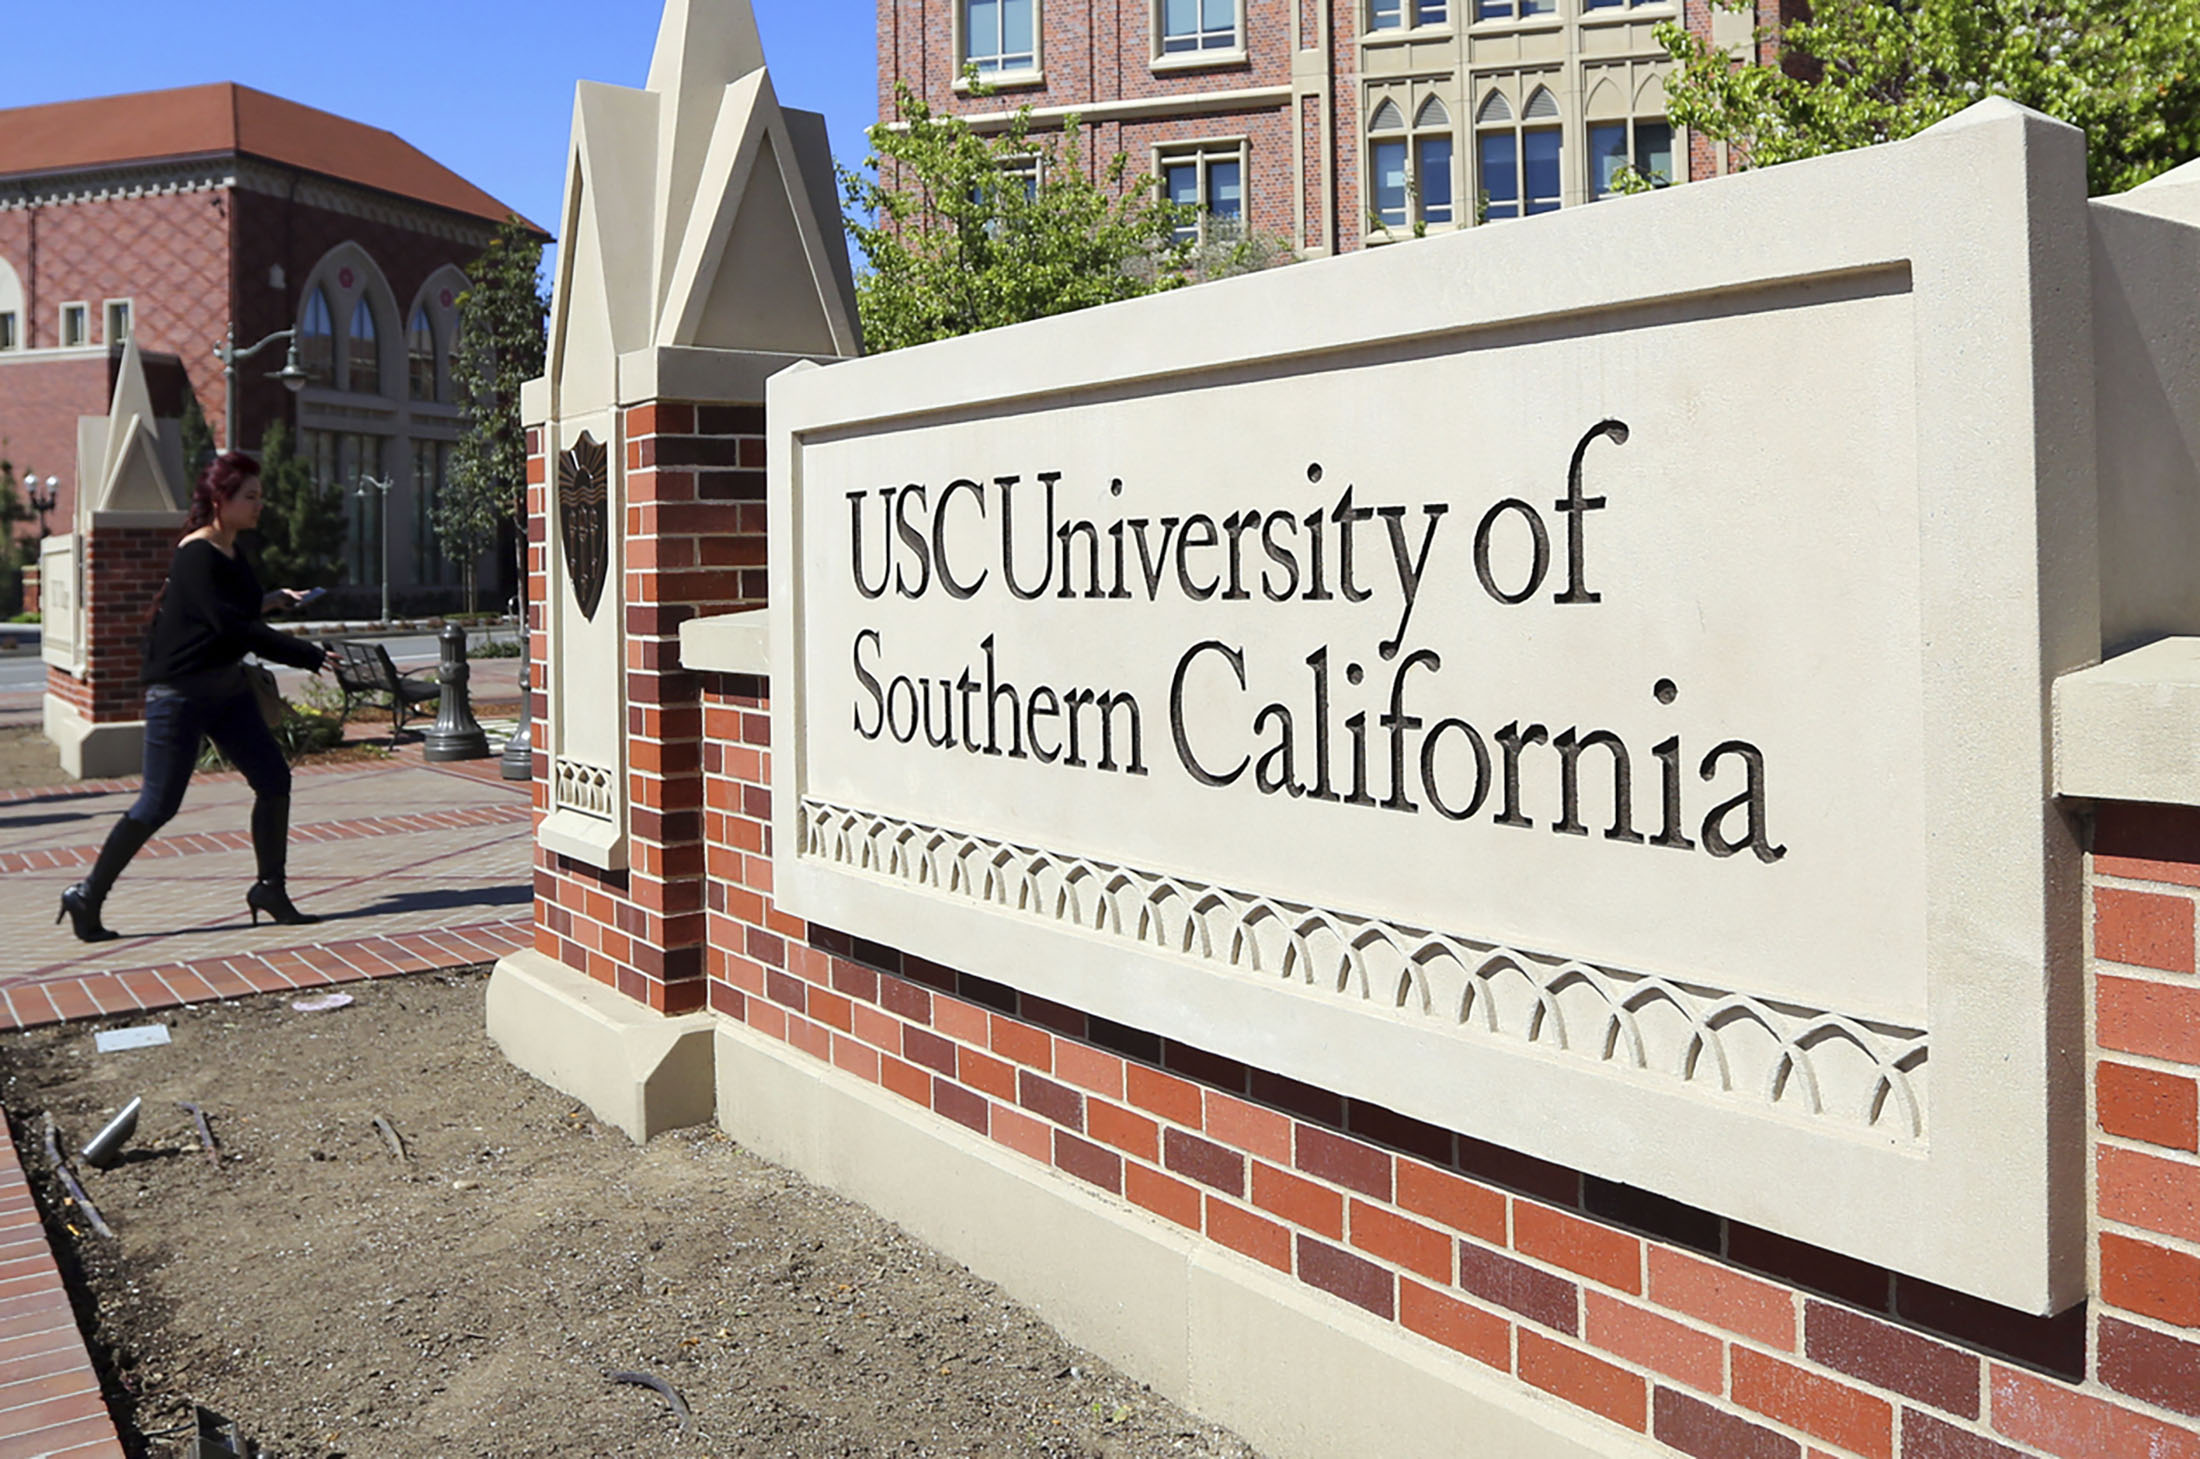 USC’s expansion efforts, including investments in health care, resulted in a credit downgrade by Moody’s.